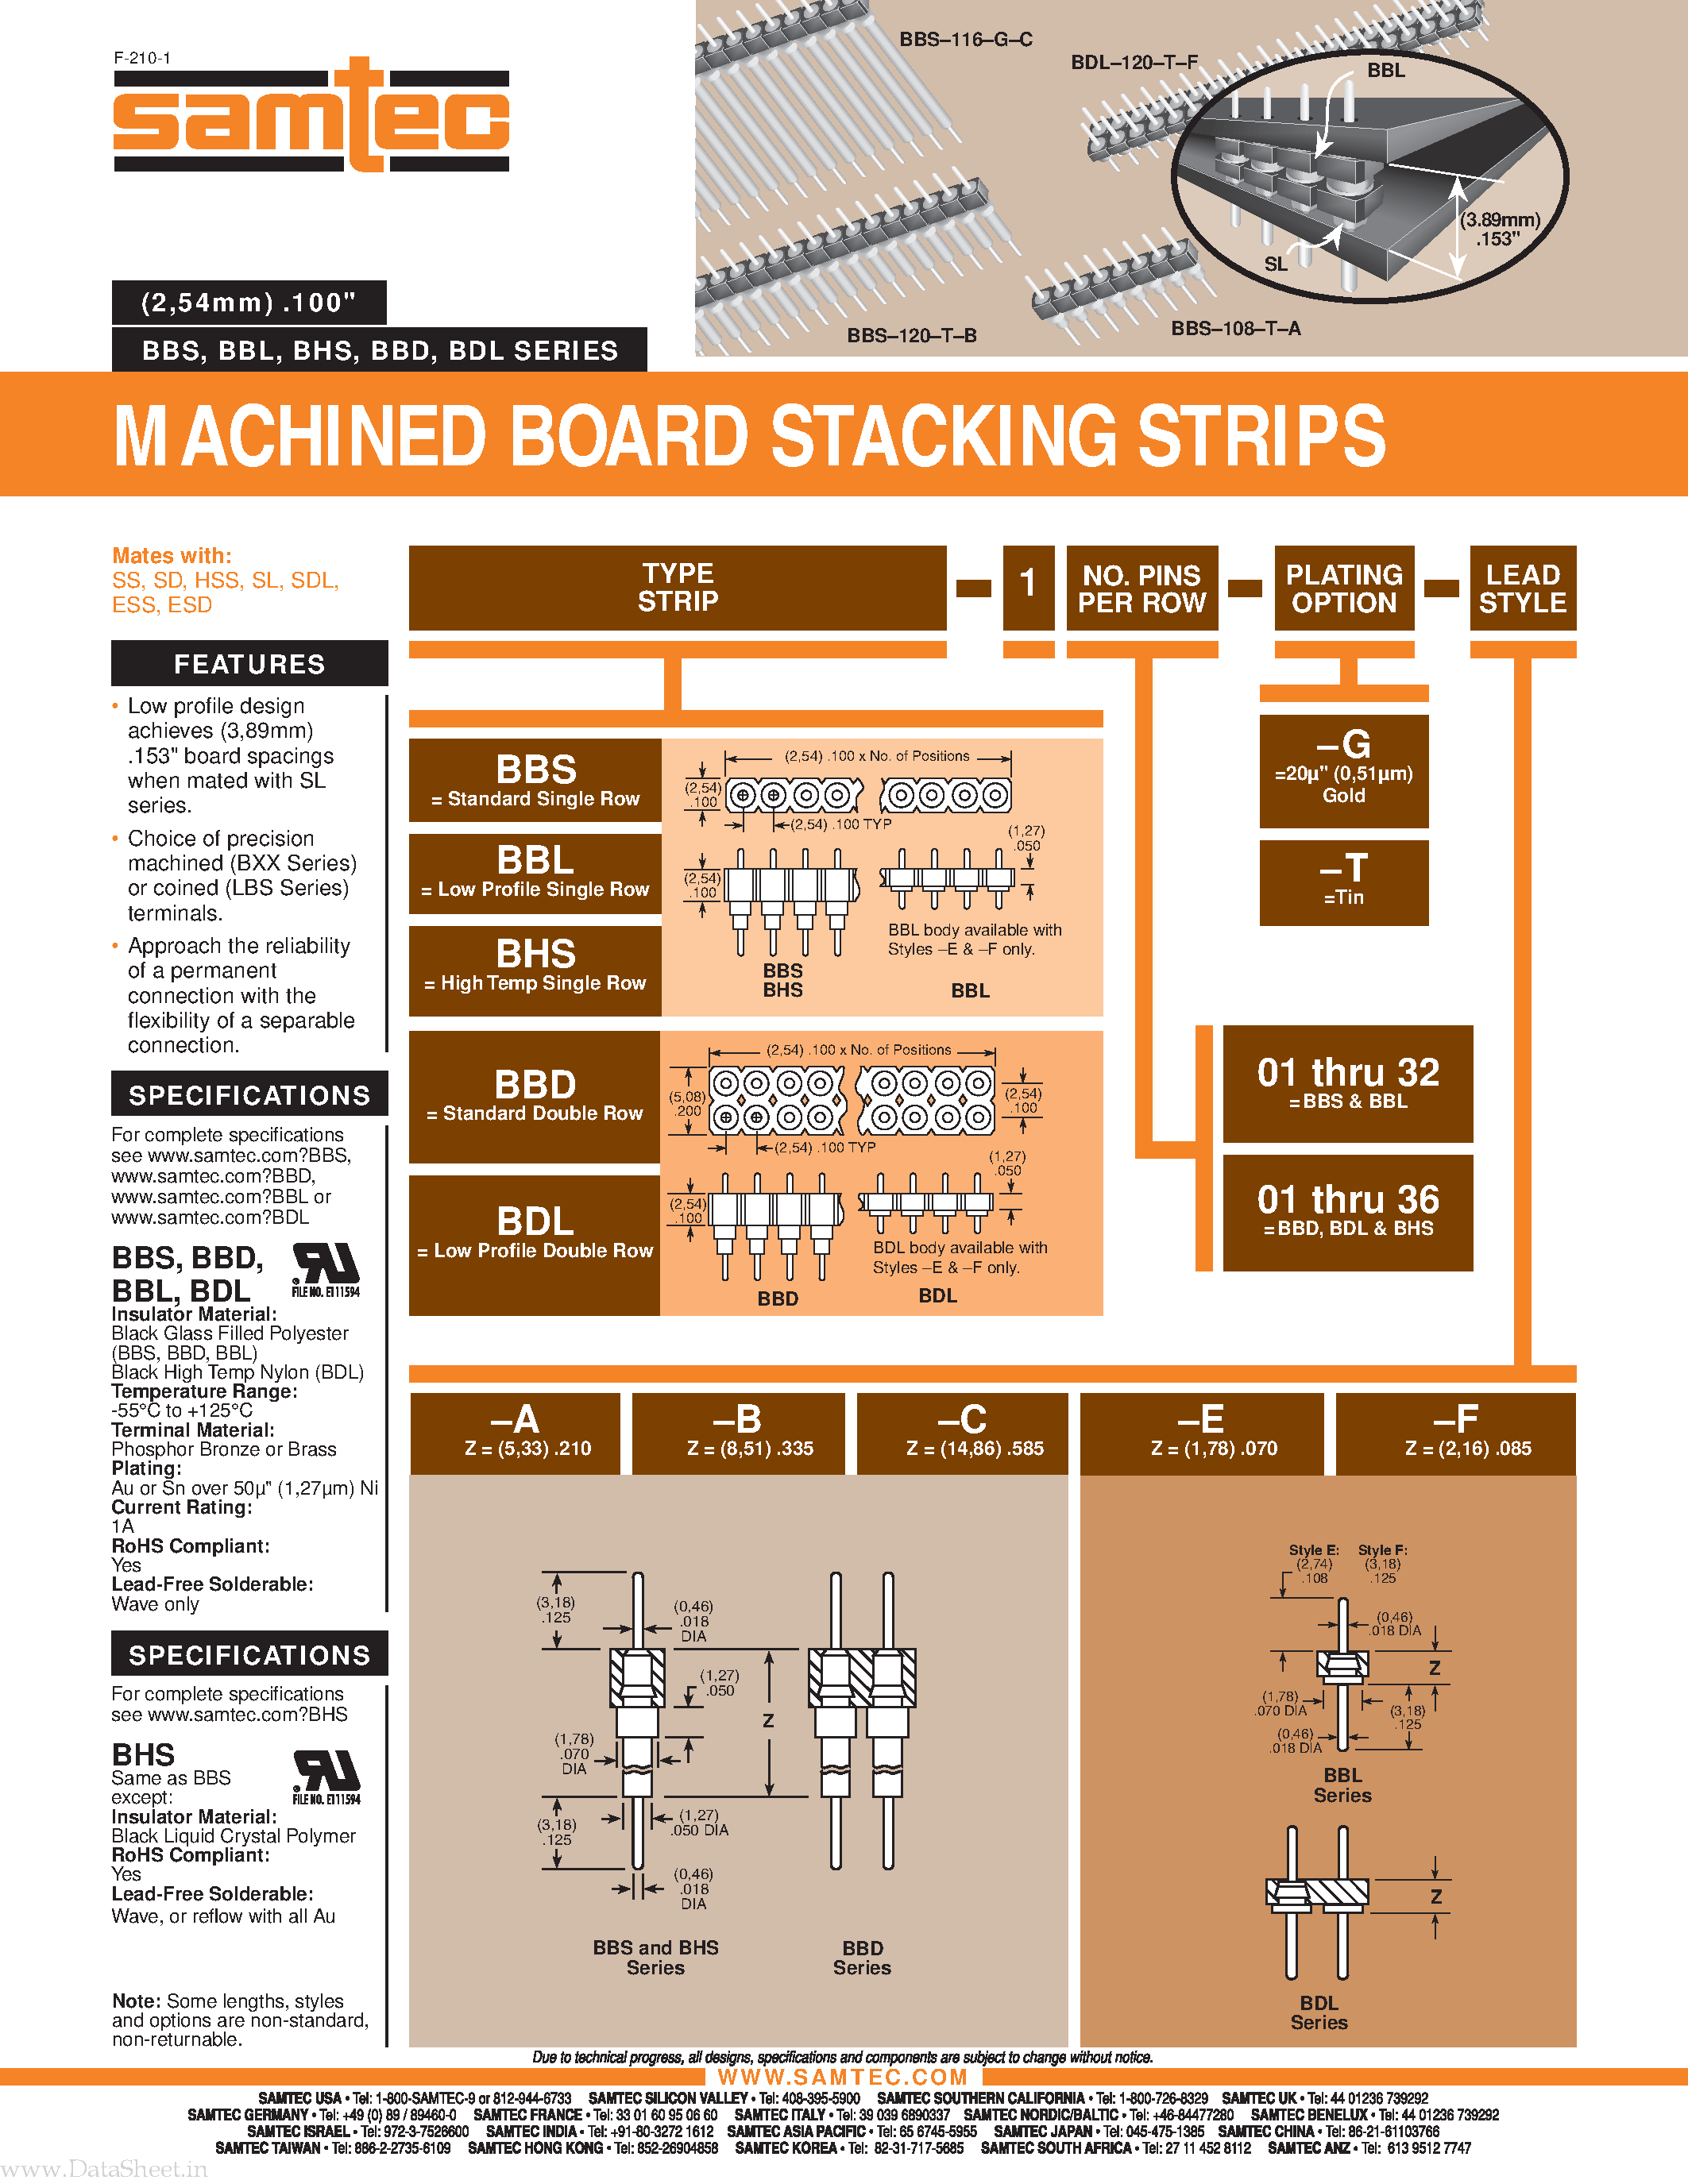 Datasheet BDL-125-G-E - MACHINED BOARD STACKING STRIPS page 1